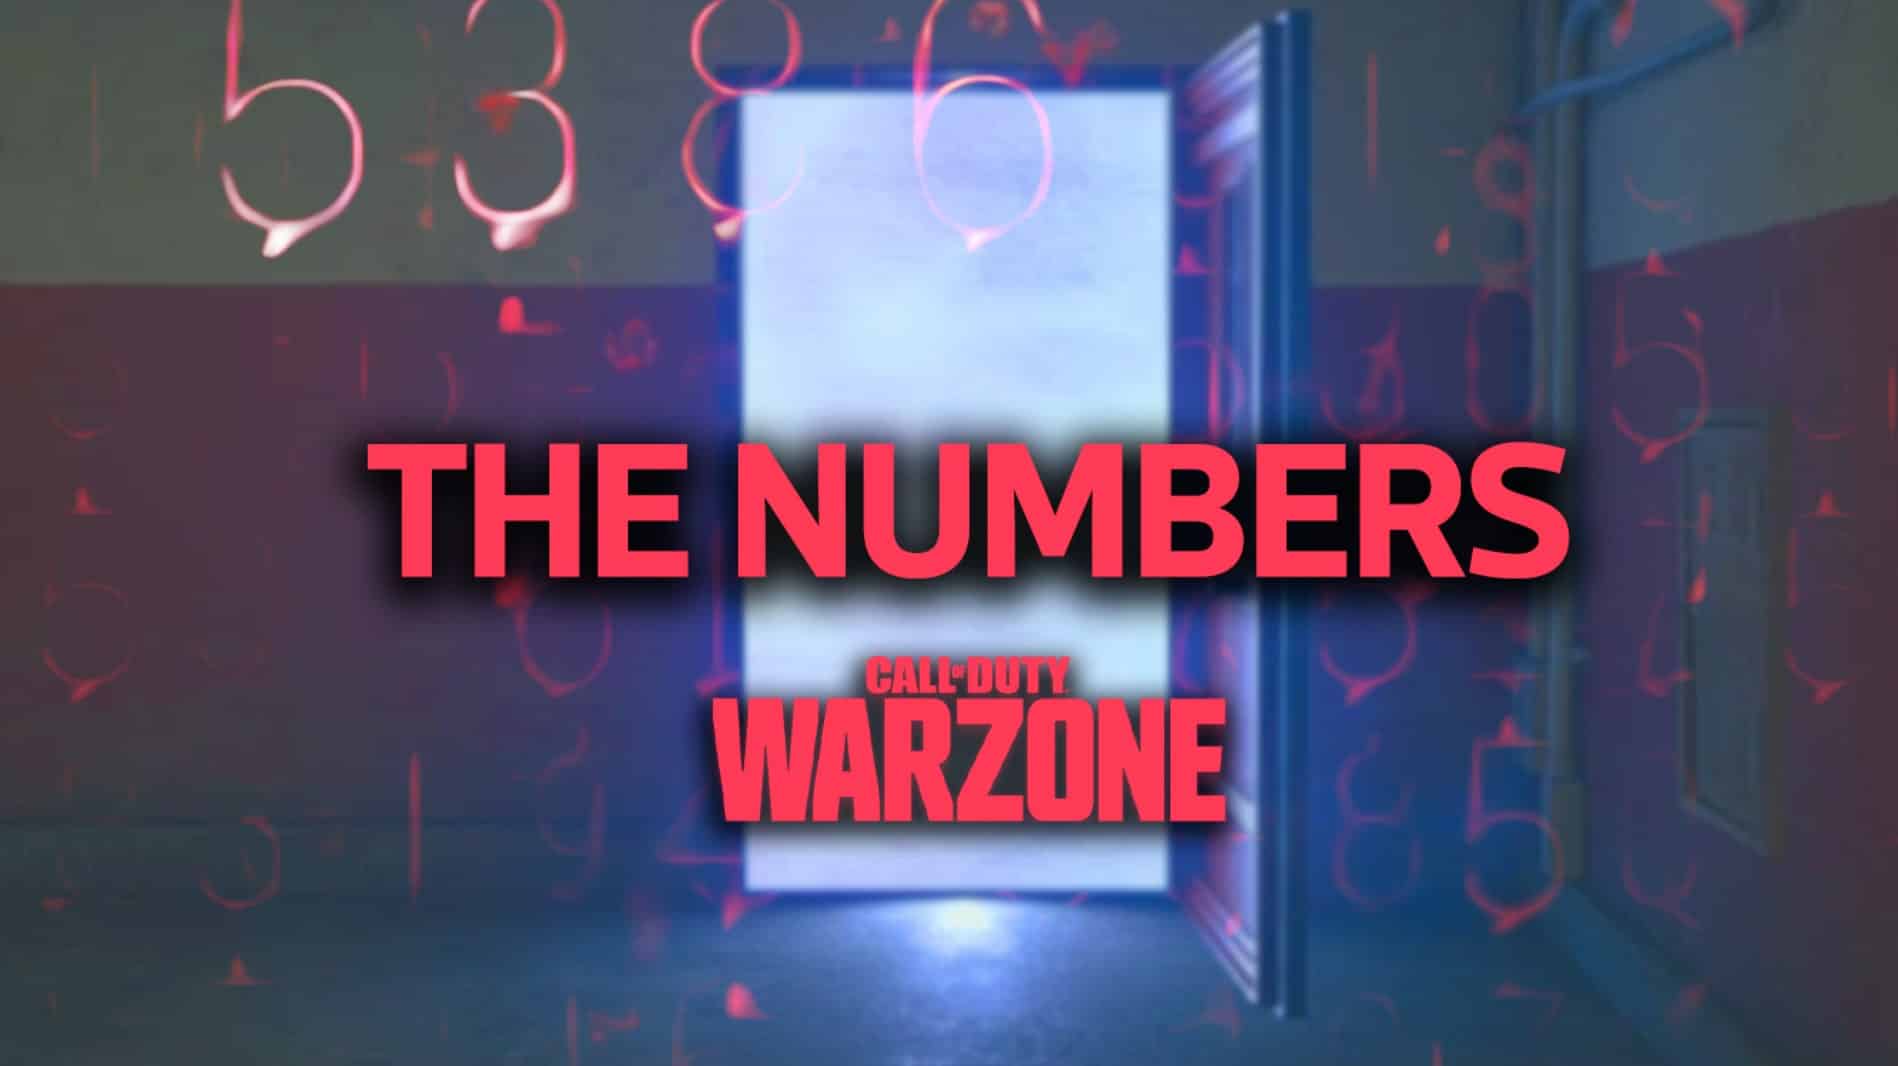 Warzone The Numbers event